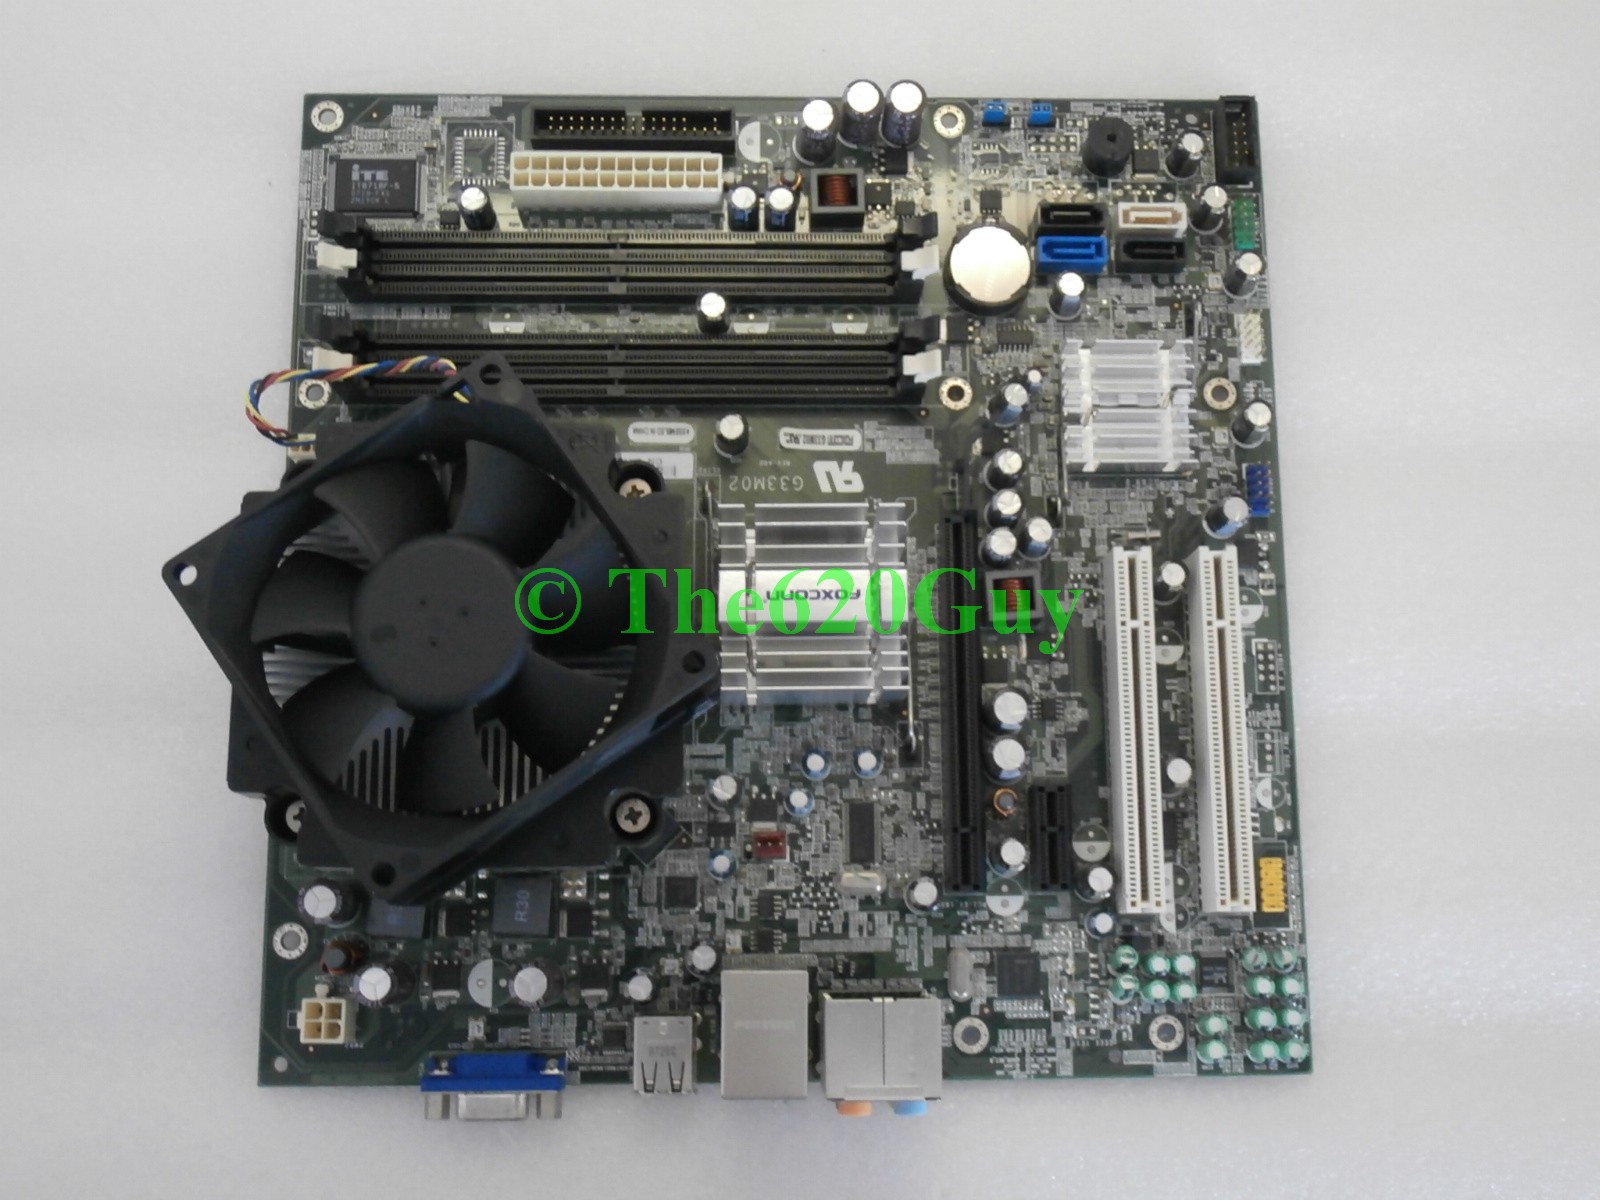 Dell Inspiron 530 Motherboard G33M02 RY007 +C2D E4400 2.0GHz G679R